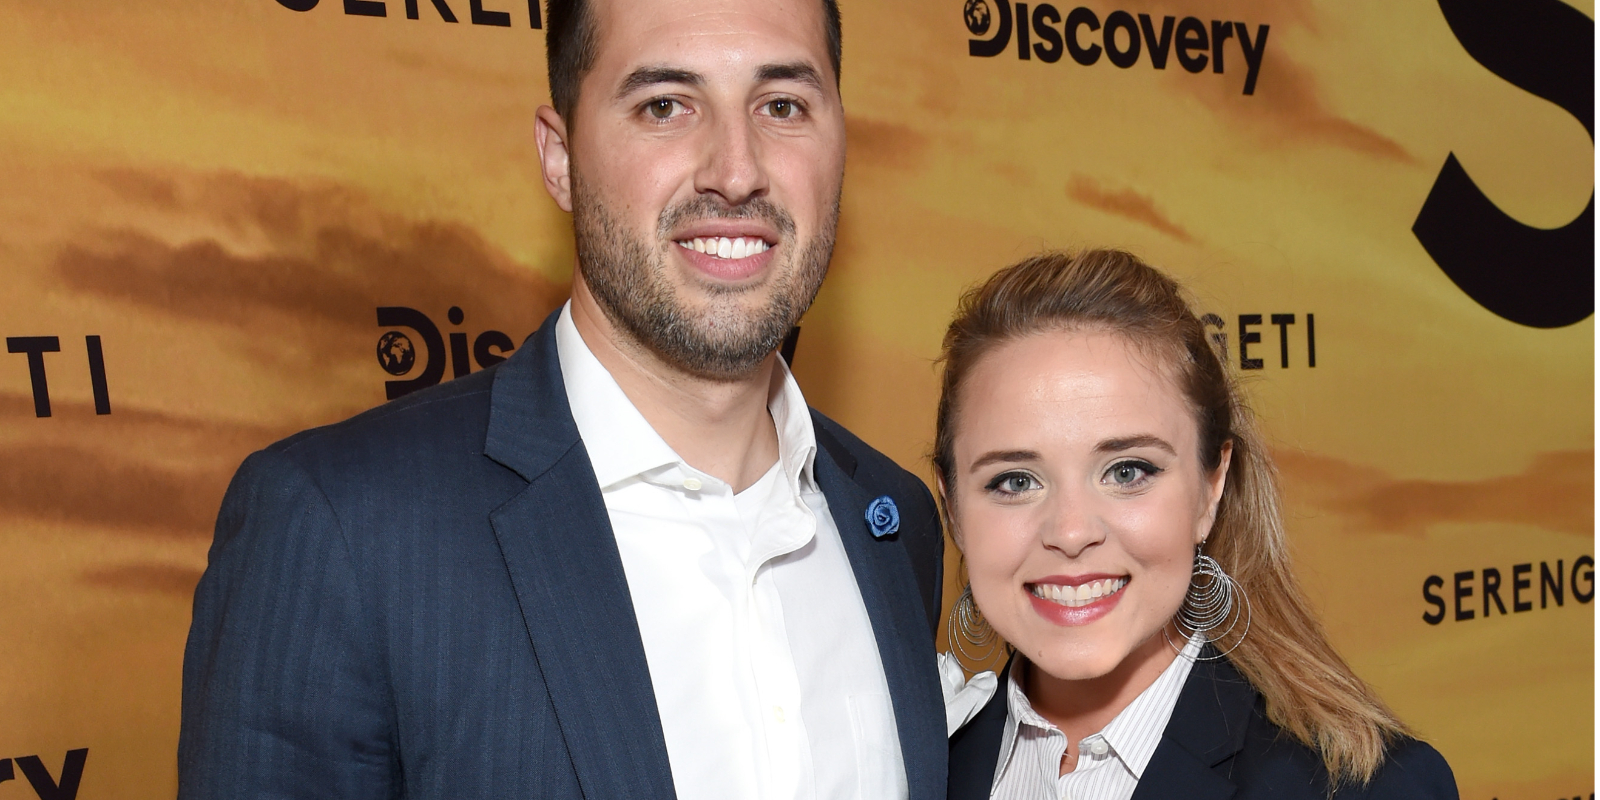 Jinger Duggar and Jeremy Vuolo at a movie premiere in 2019.